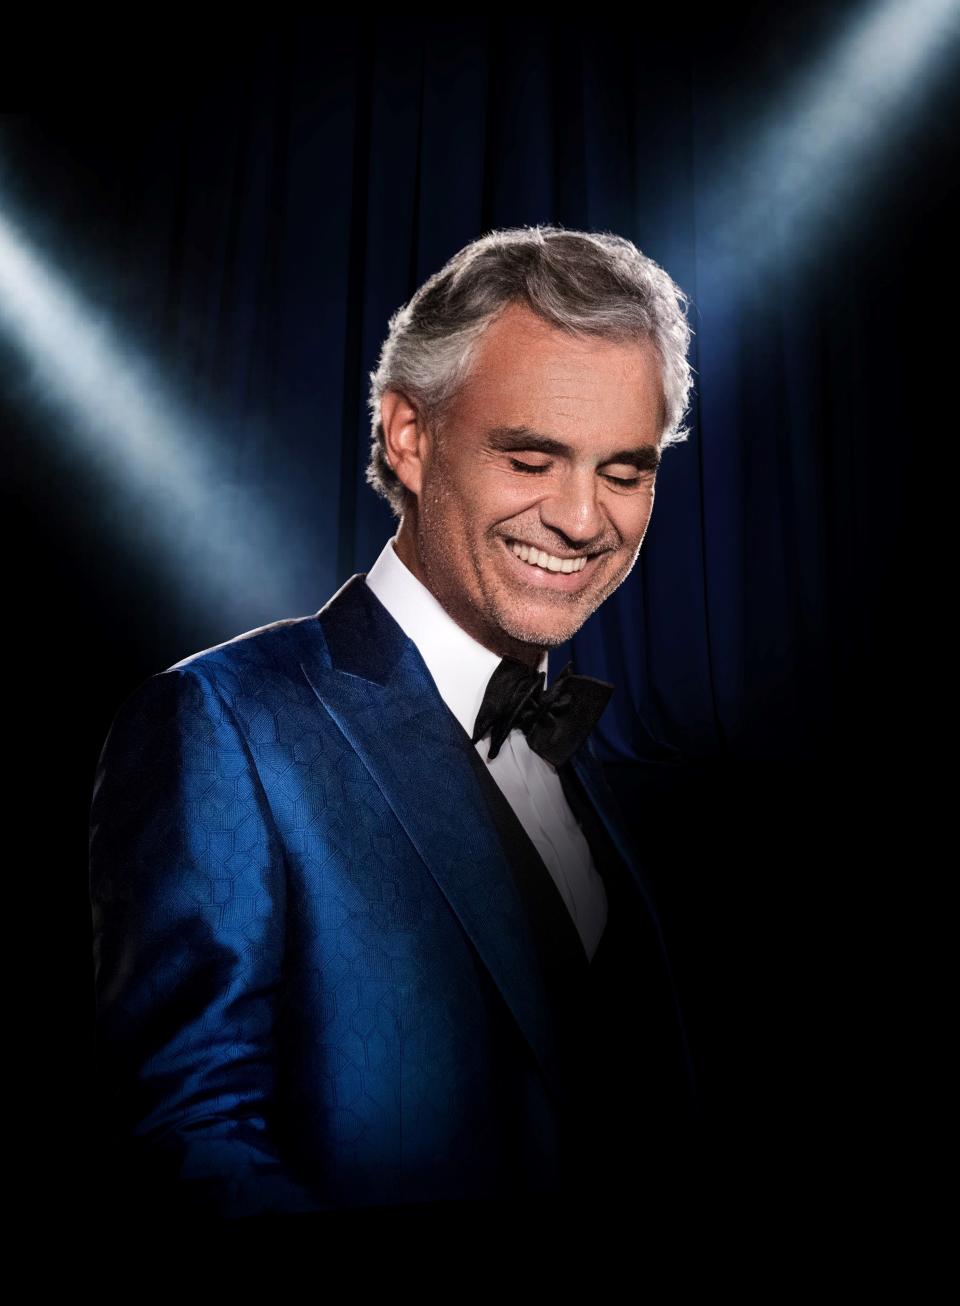 Opera singer Andrea Bocelli is set to take the stage at Heritage Bank Center on Sunday, April 7.